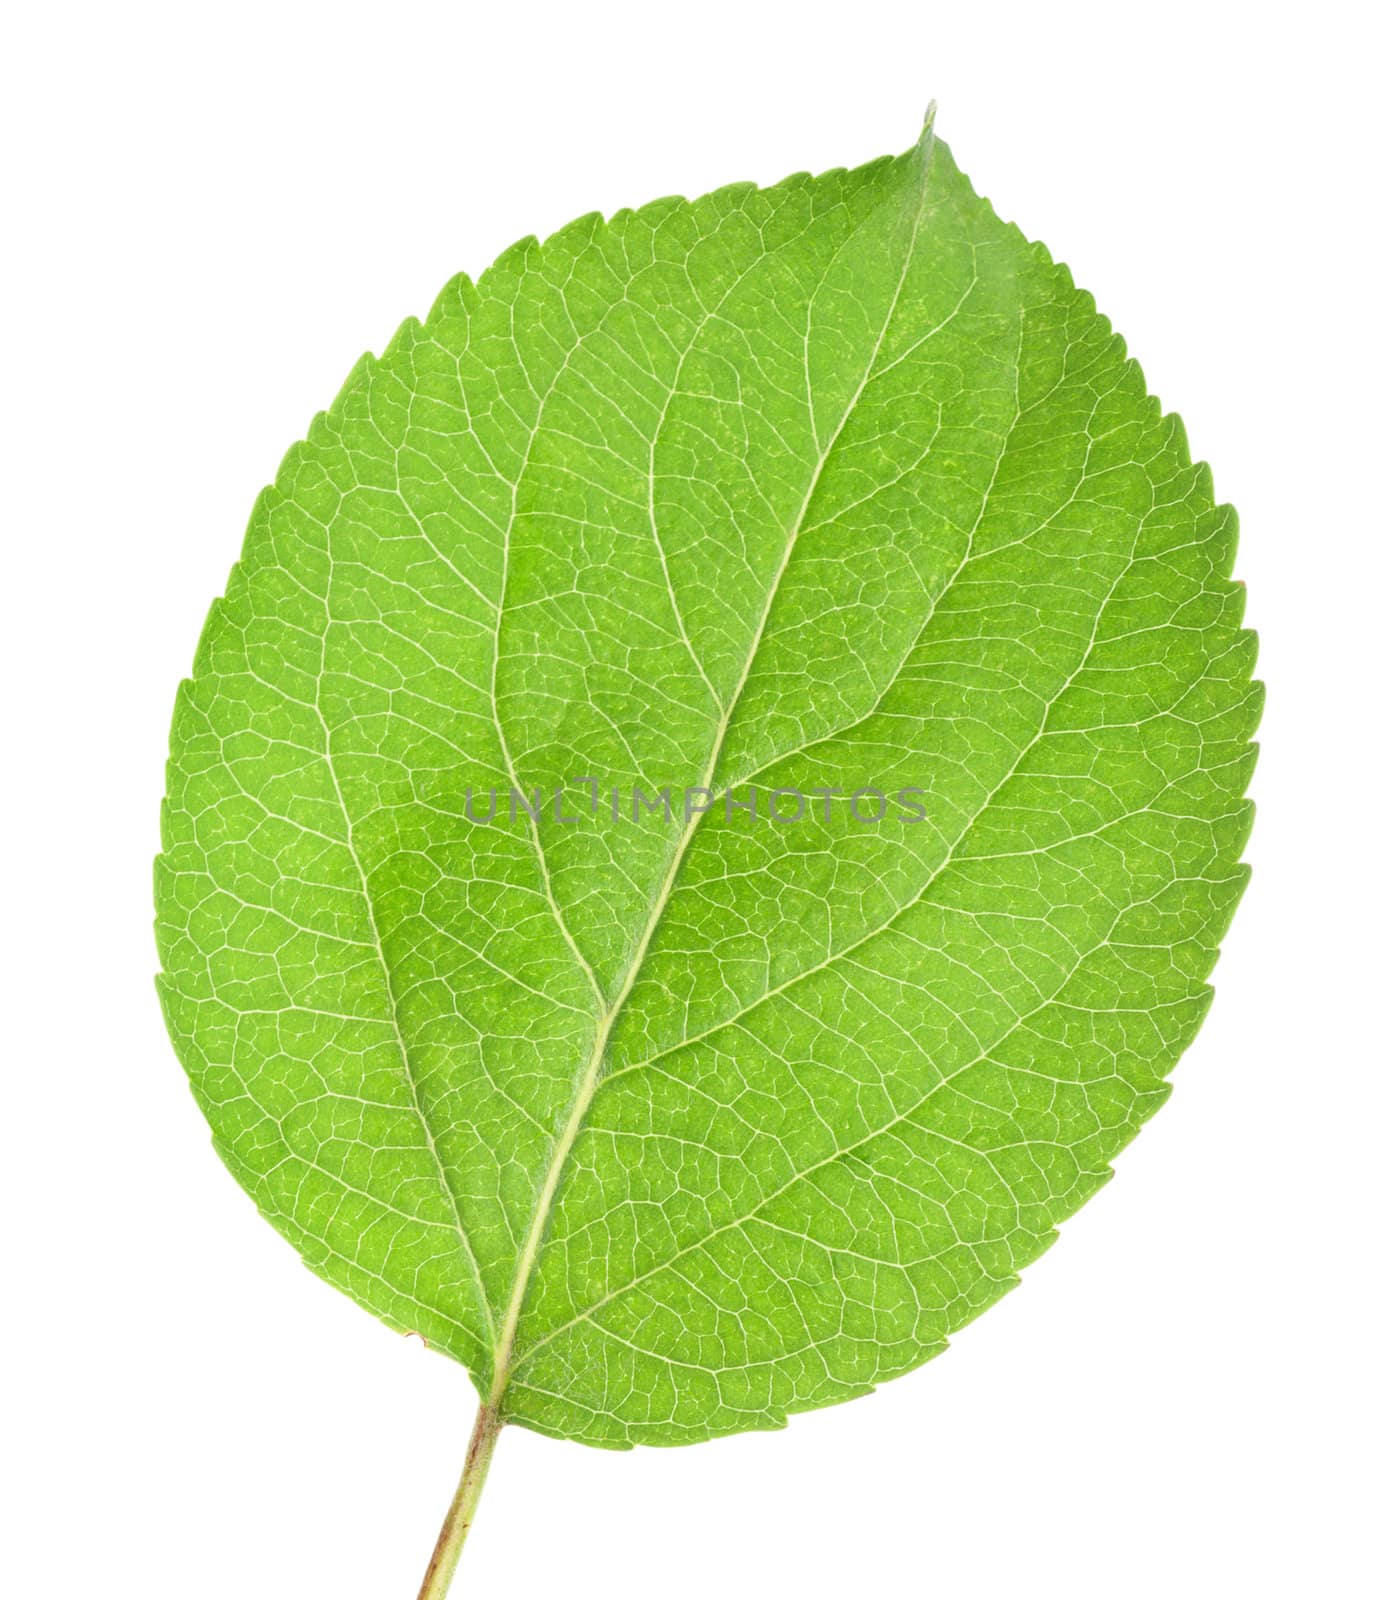 Young leaves isolated on a white background